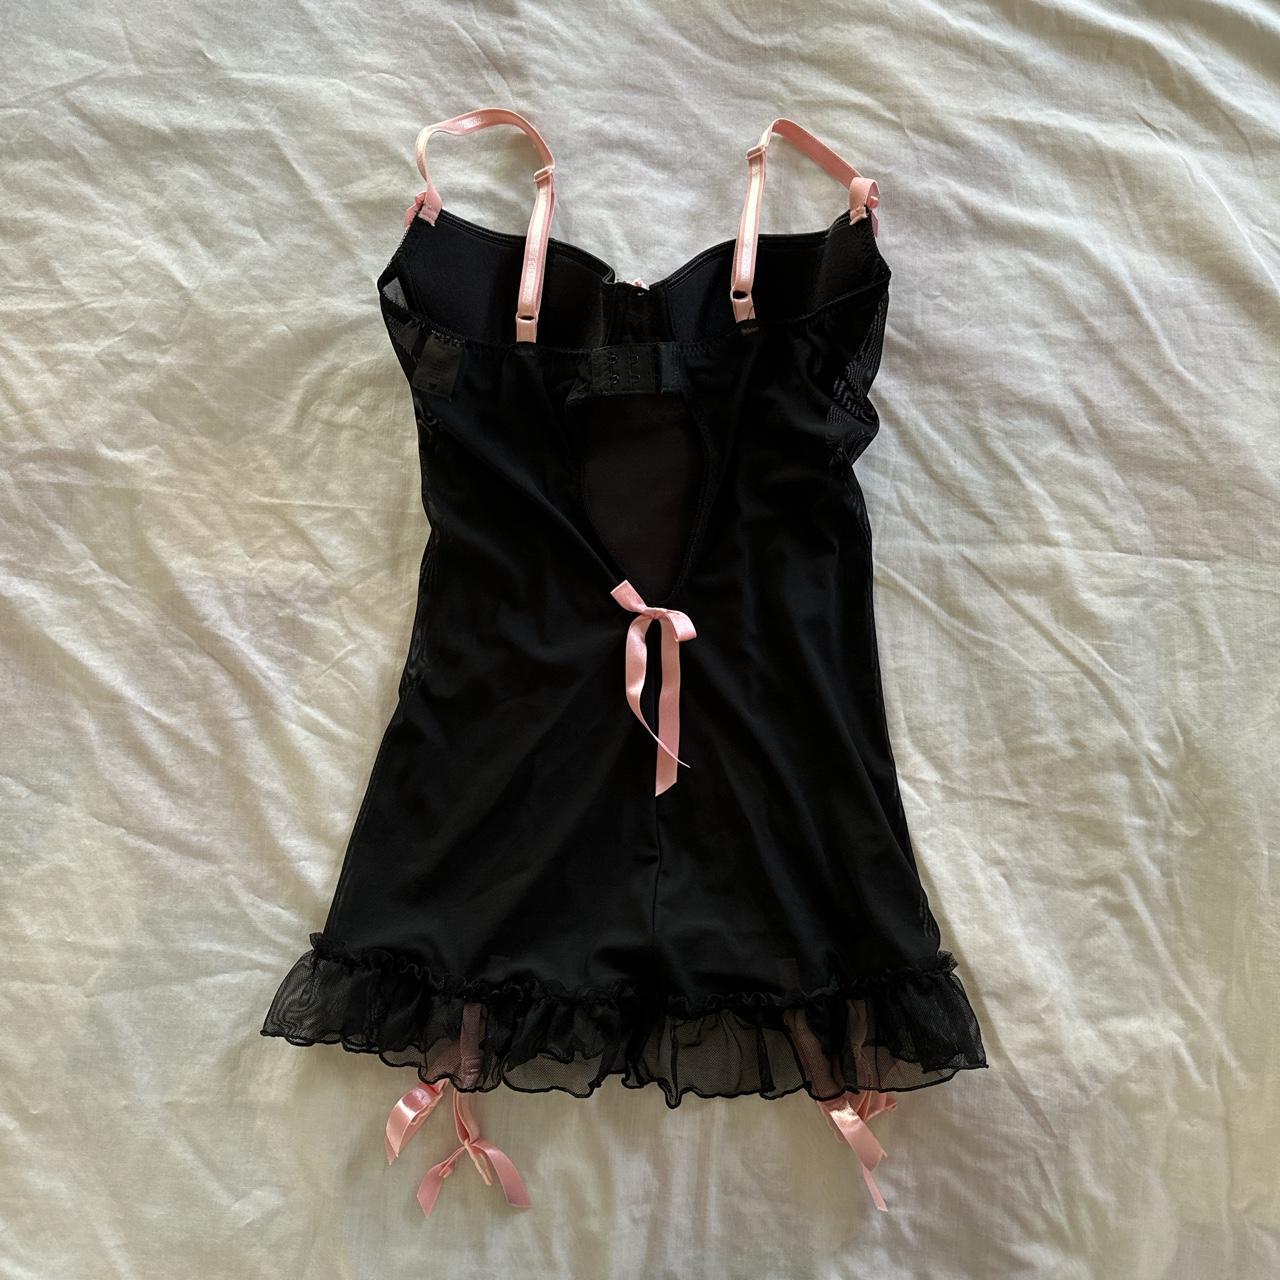 Dreamgirl Women's Black and Pink Corset | Depop